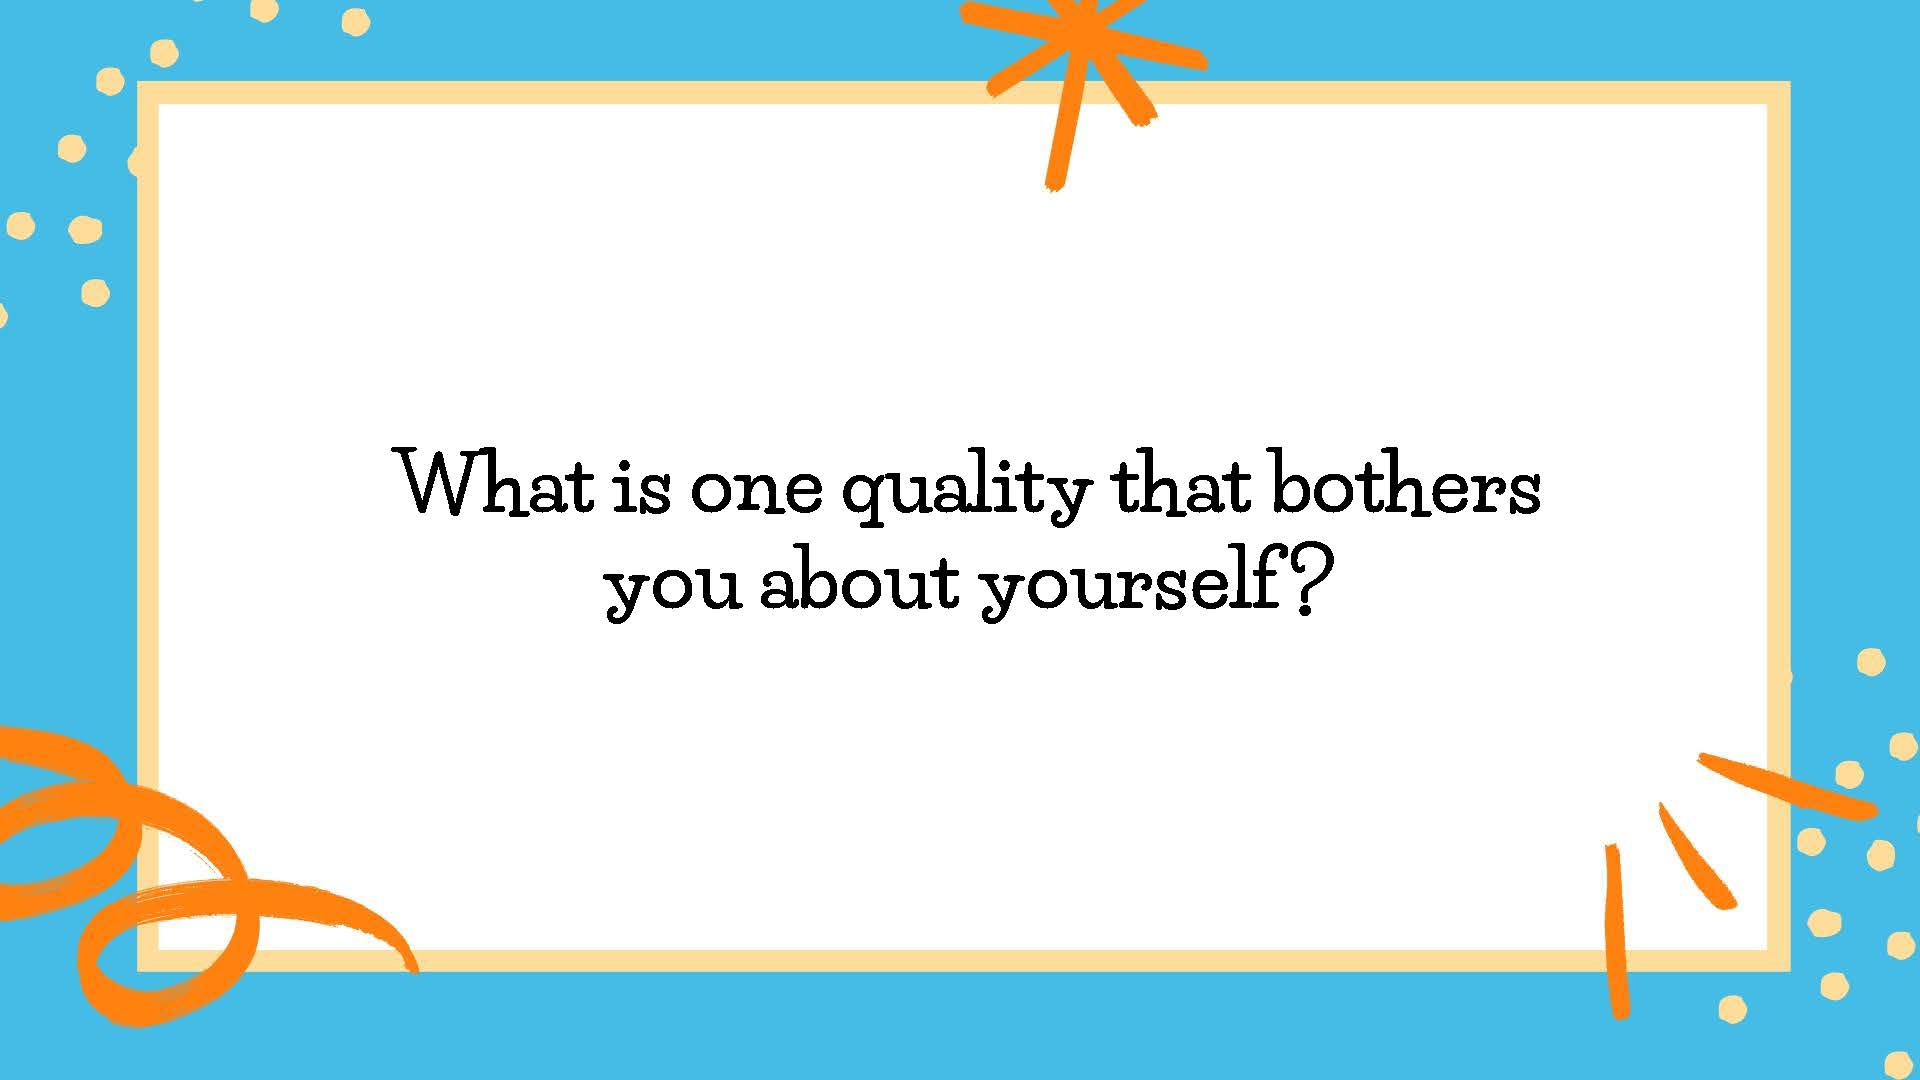 What is one quality that bothers you about yourself?